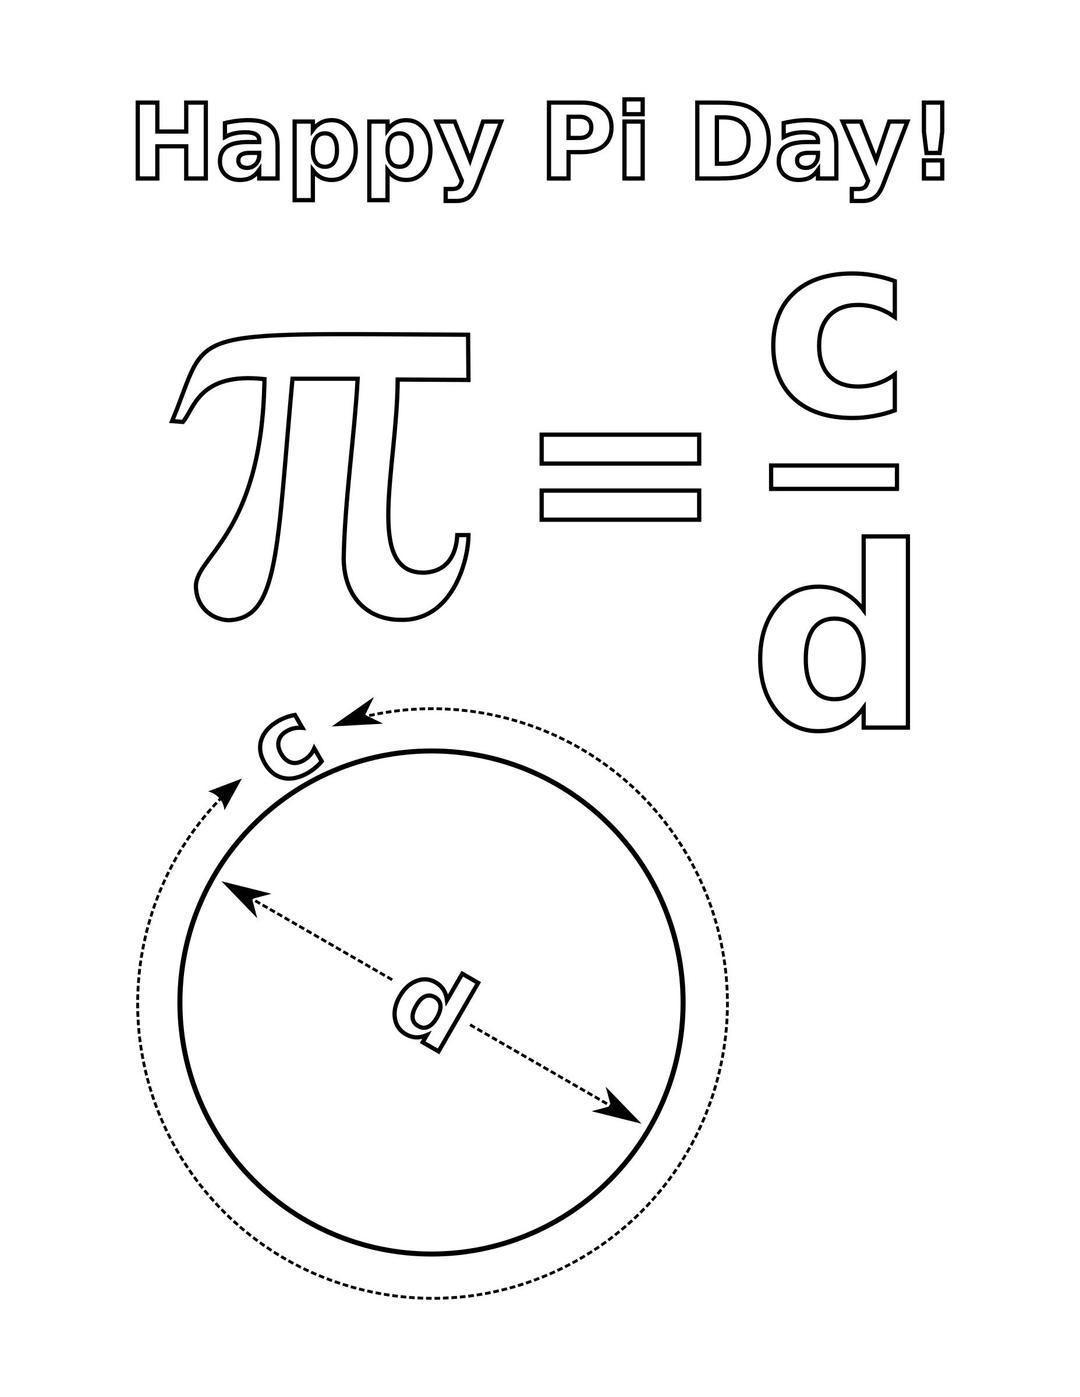 Coloring page - pi day lesson on circles and math png transparent